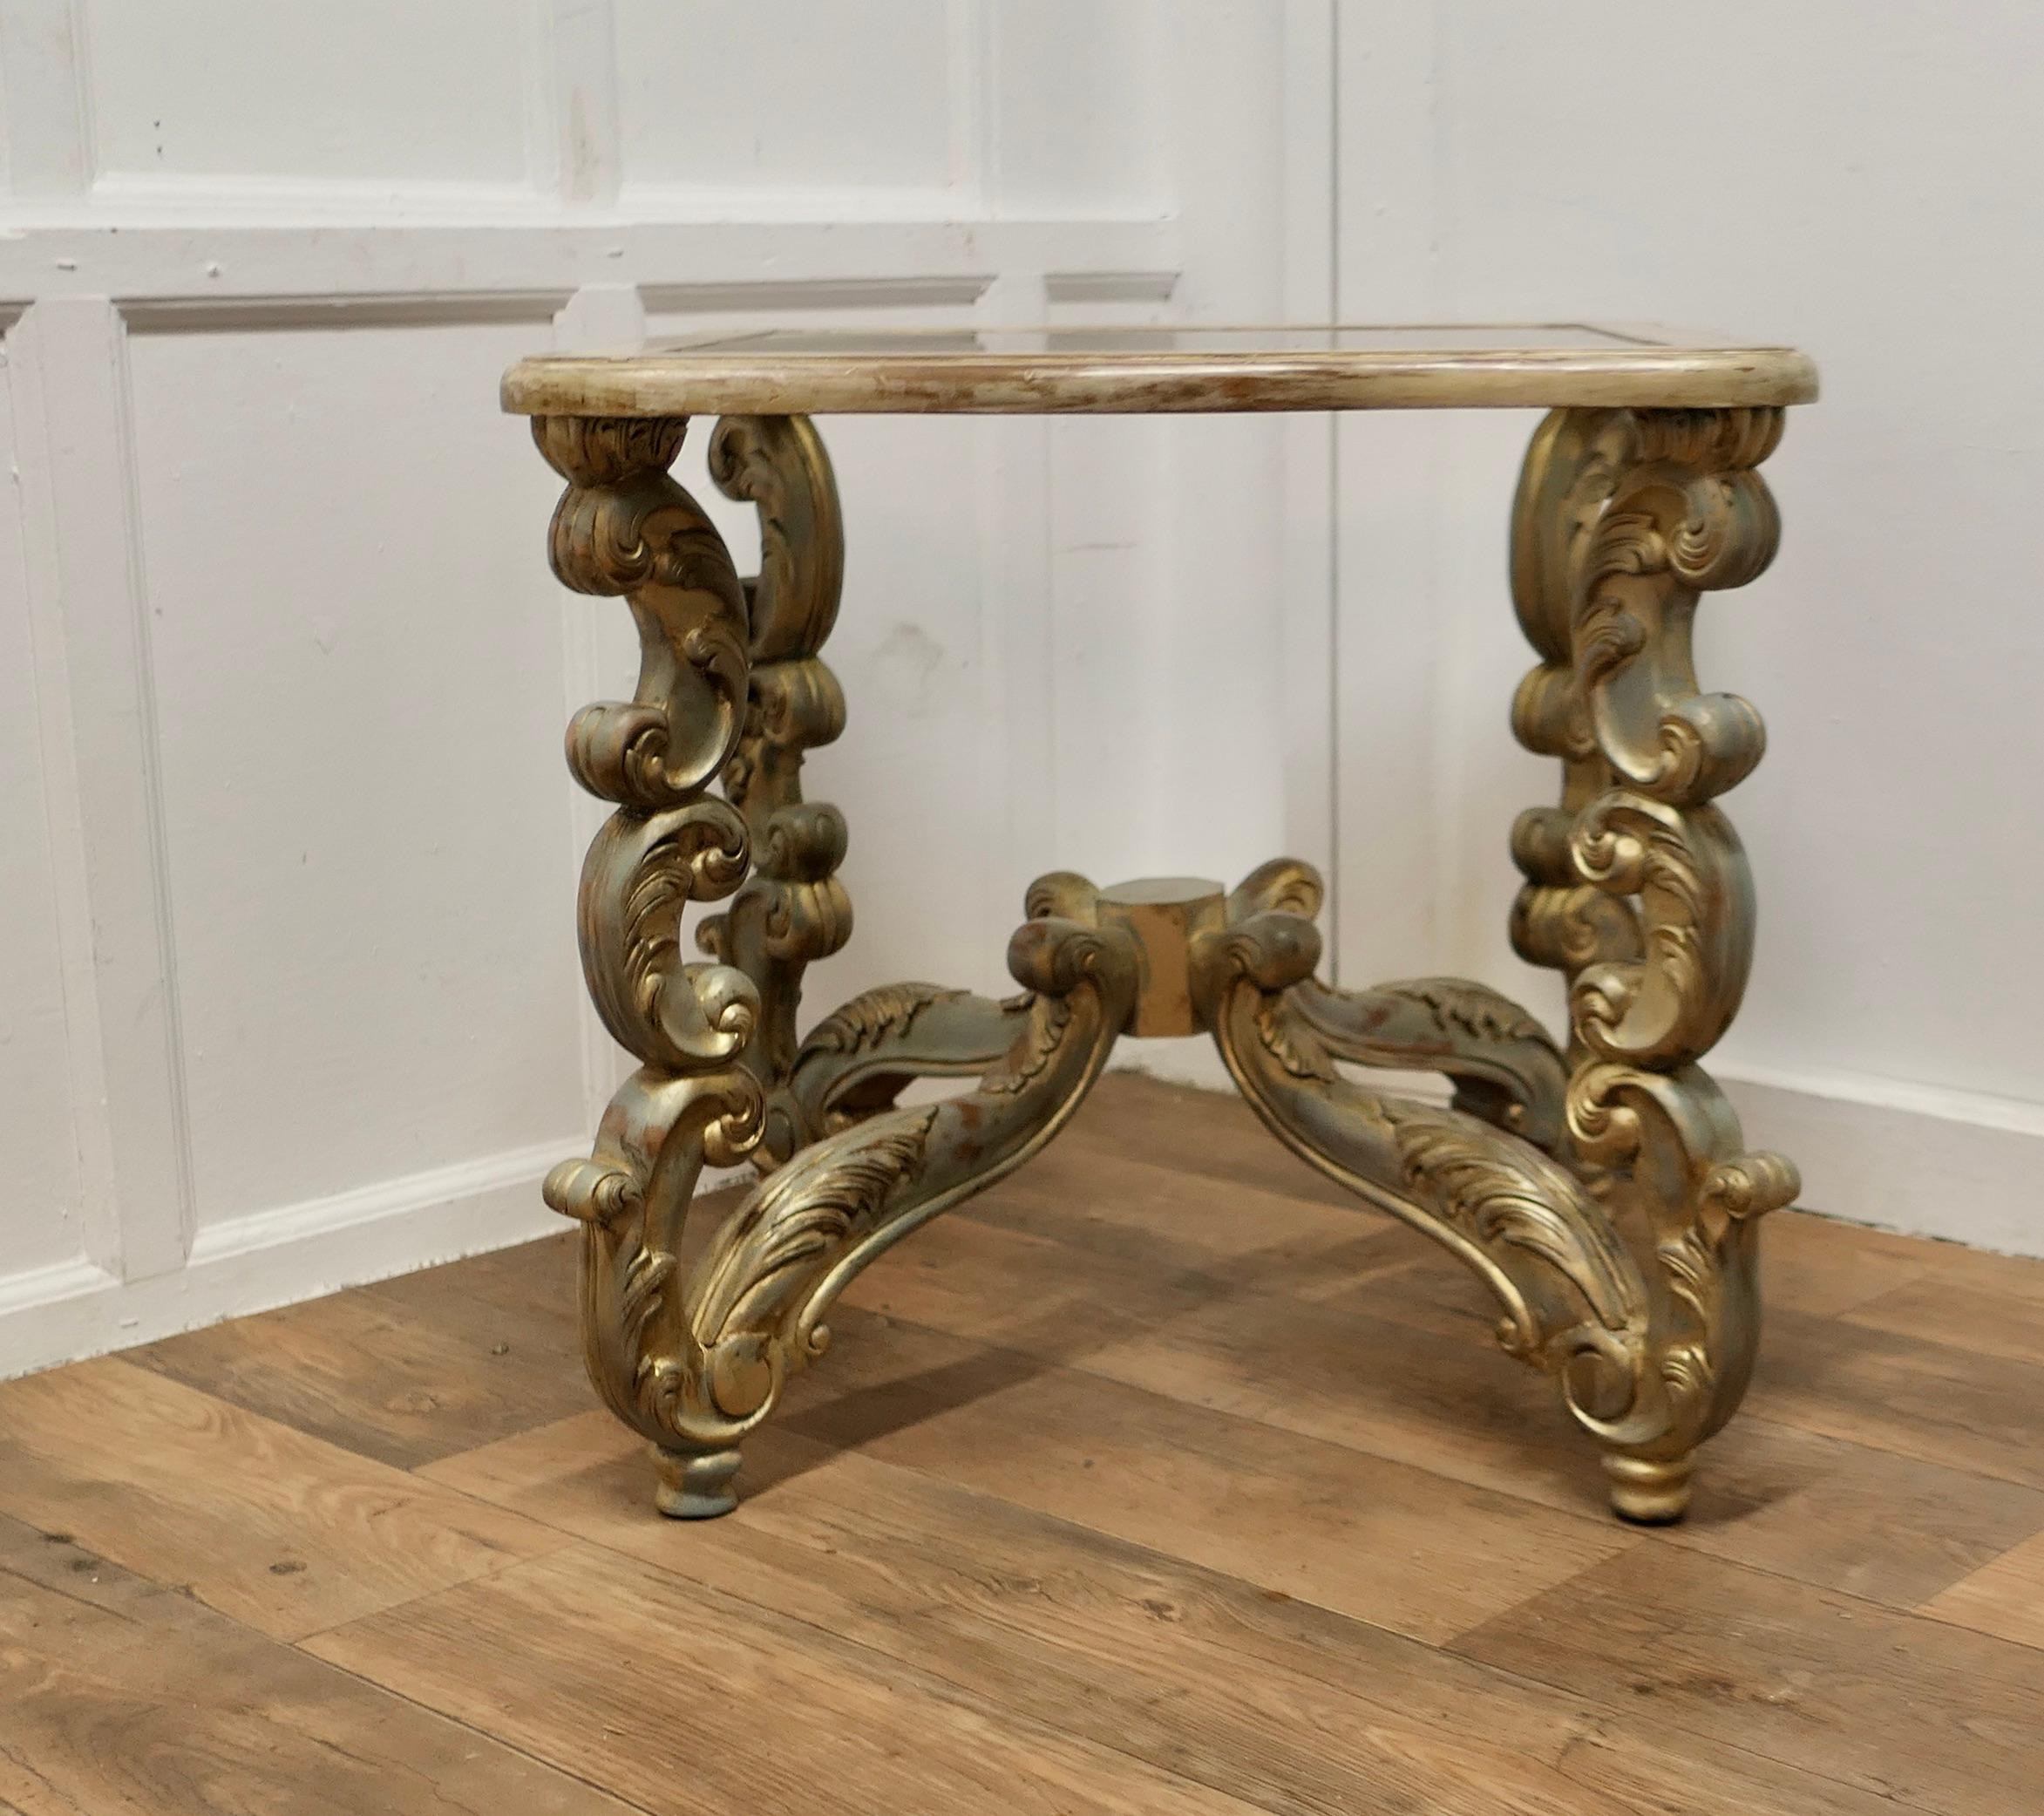  French Baroque Style Carved and Painted Occasional Table

This is a very unusual piece, the table is hand carved with bold scroll and acanthus decorative legs and elaborate crossing stretcher beneath
The table top is square with a waved edge and an